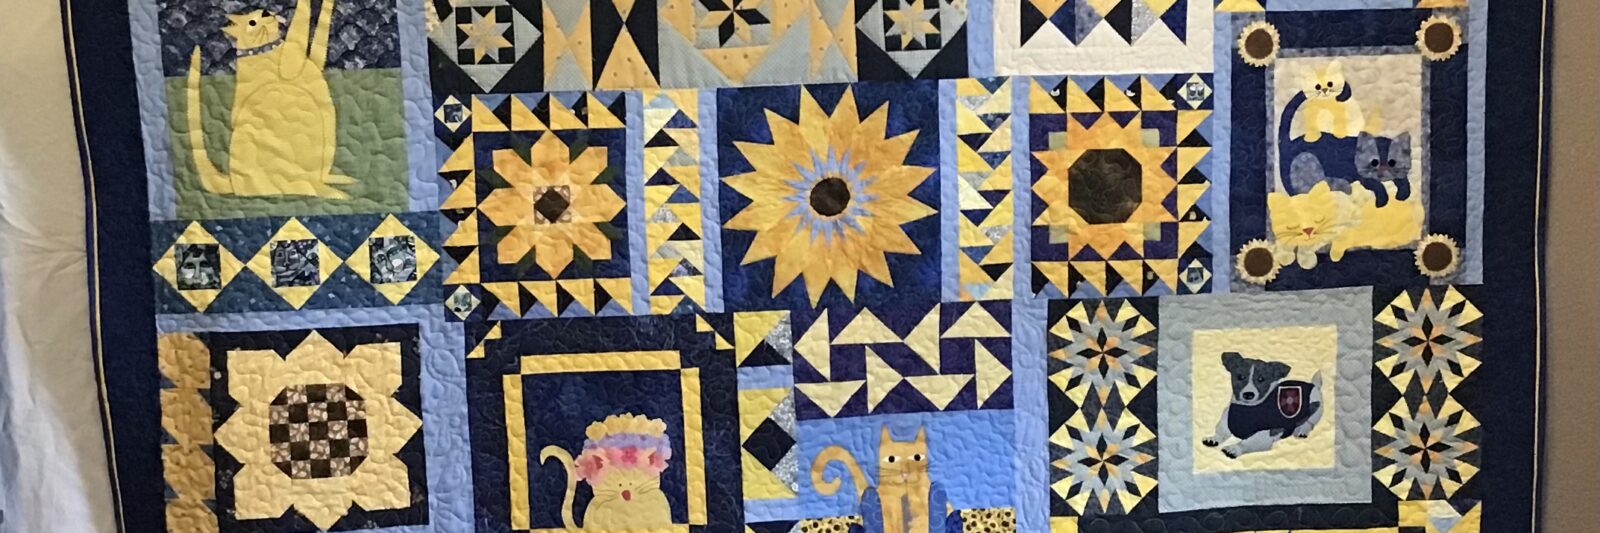 QuiltingFool Introduces Her Cats and Sunflowers Ukraine Donation Quilt 9